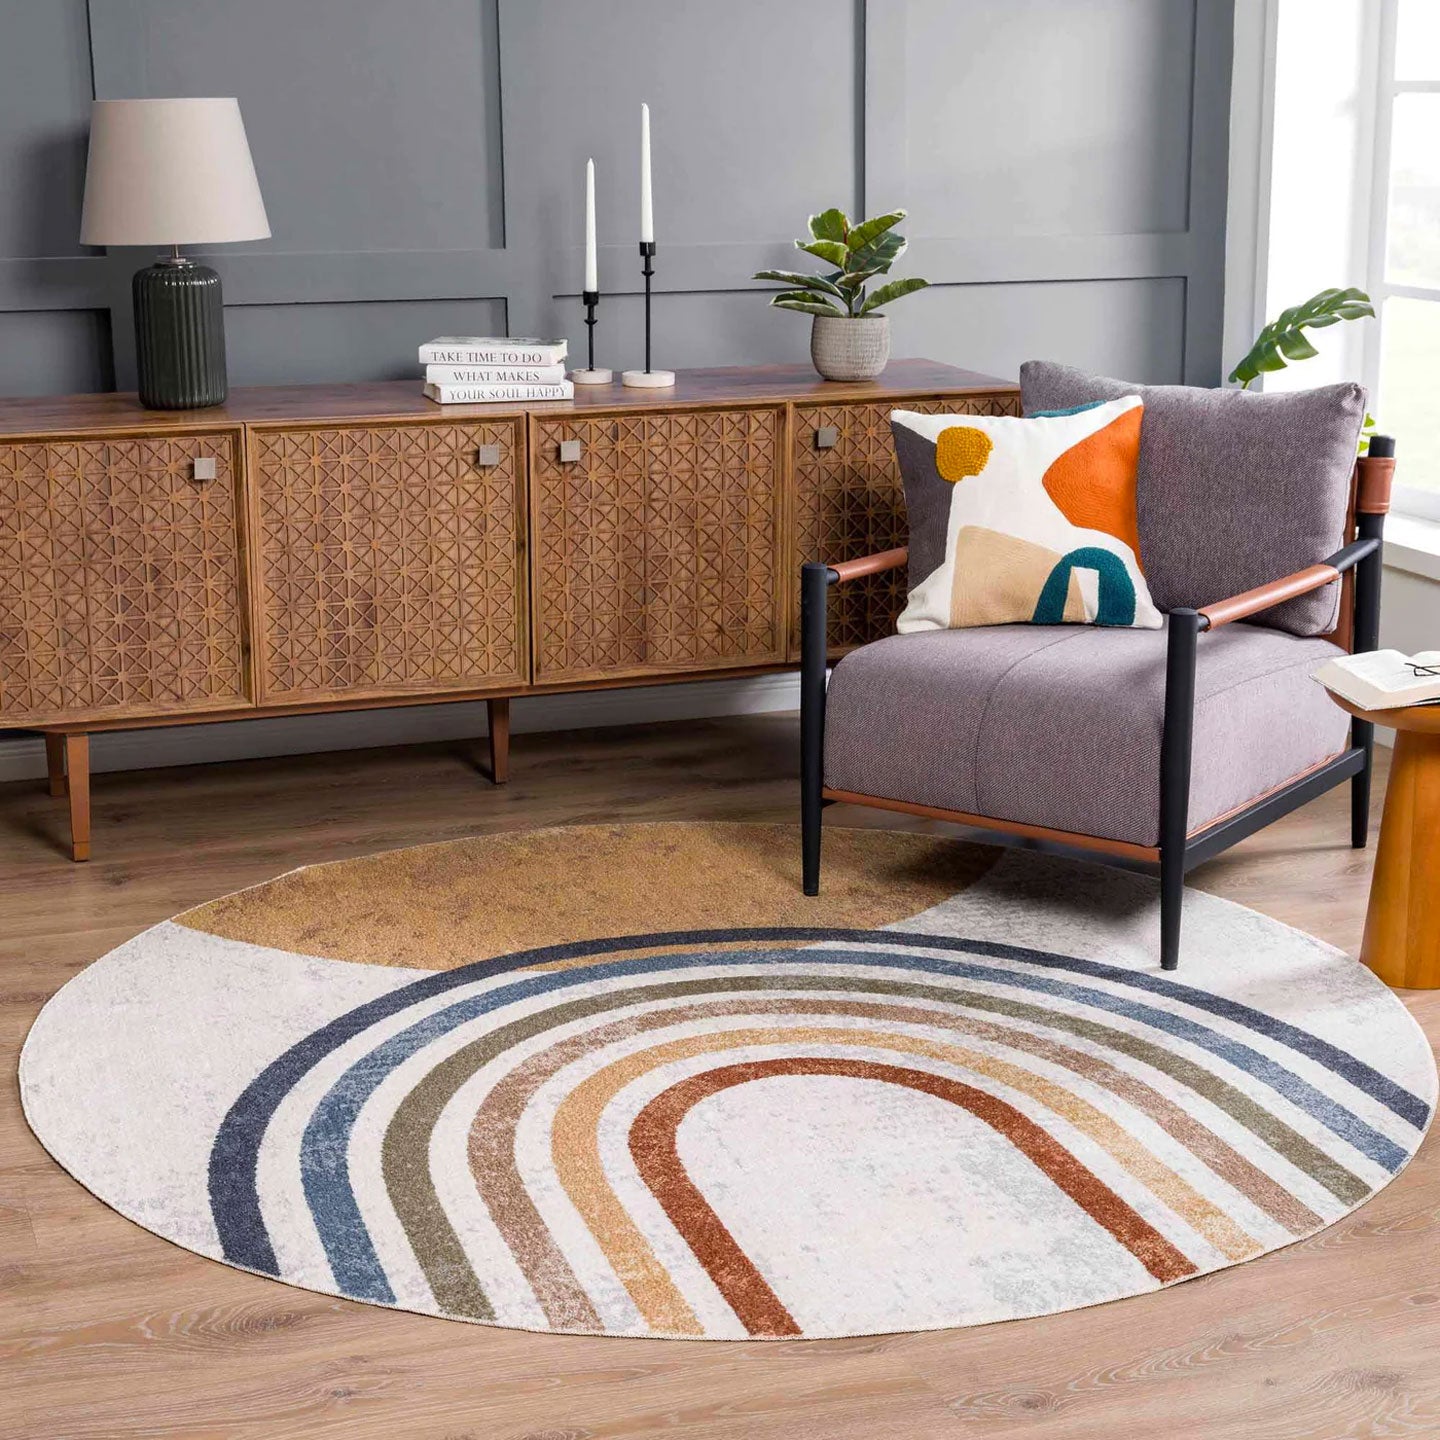 Washable Round Rugs: Circle of Elegance & Practicality – Boutique Rugs